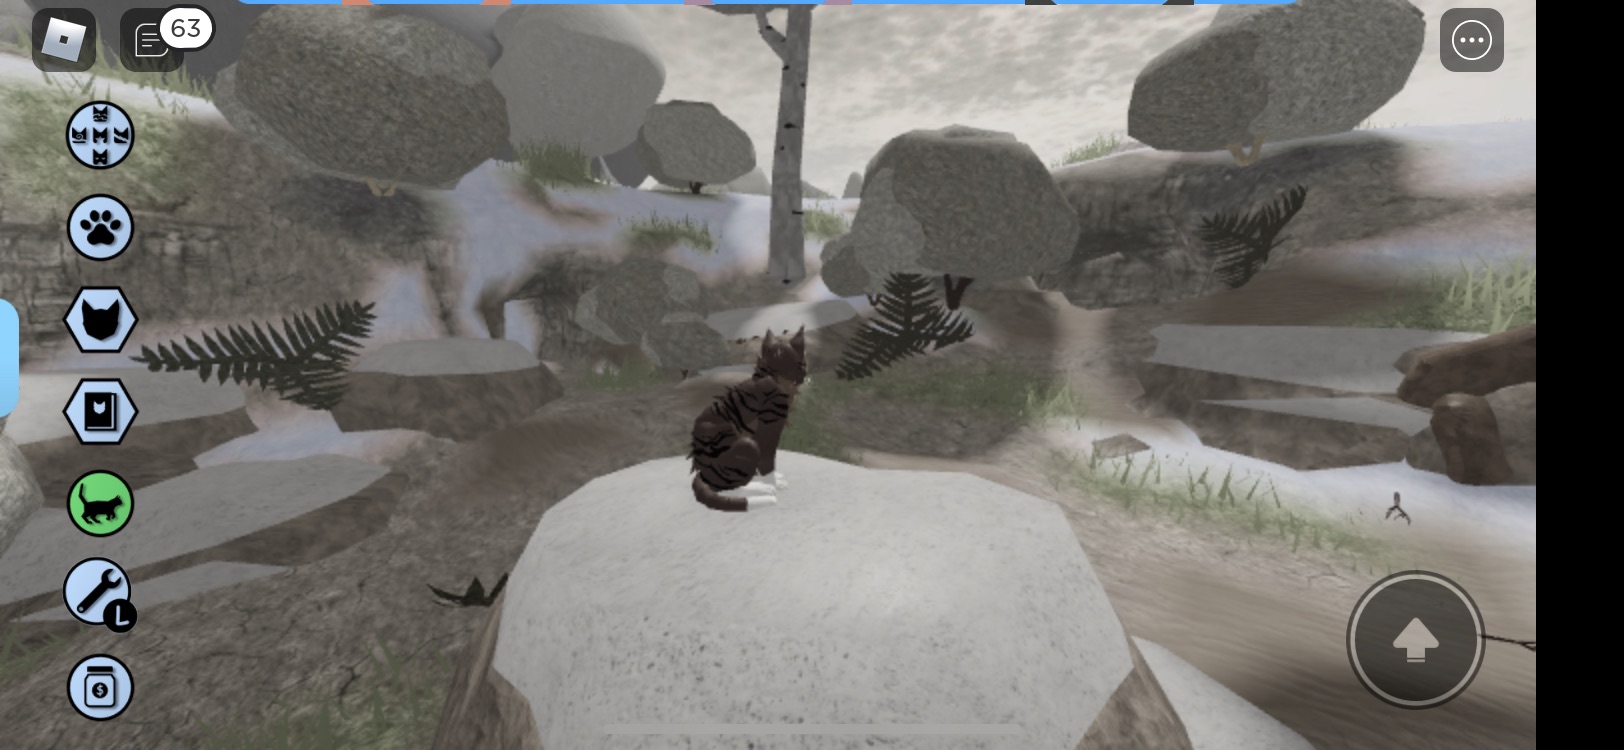 Introducing the official Warrior Cats game on Roblox